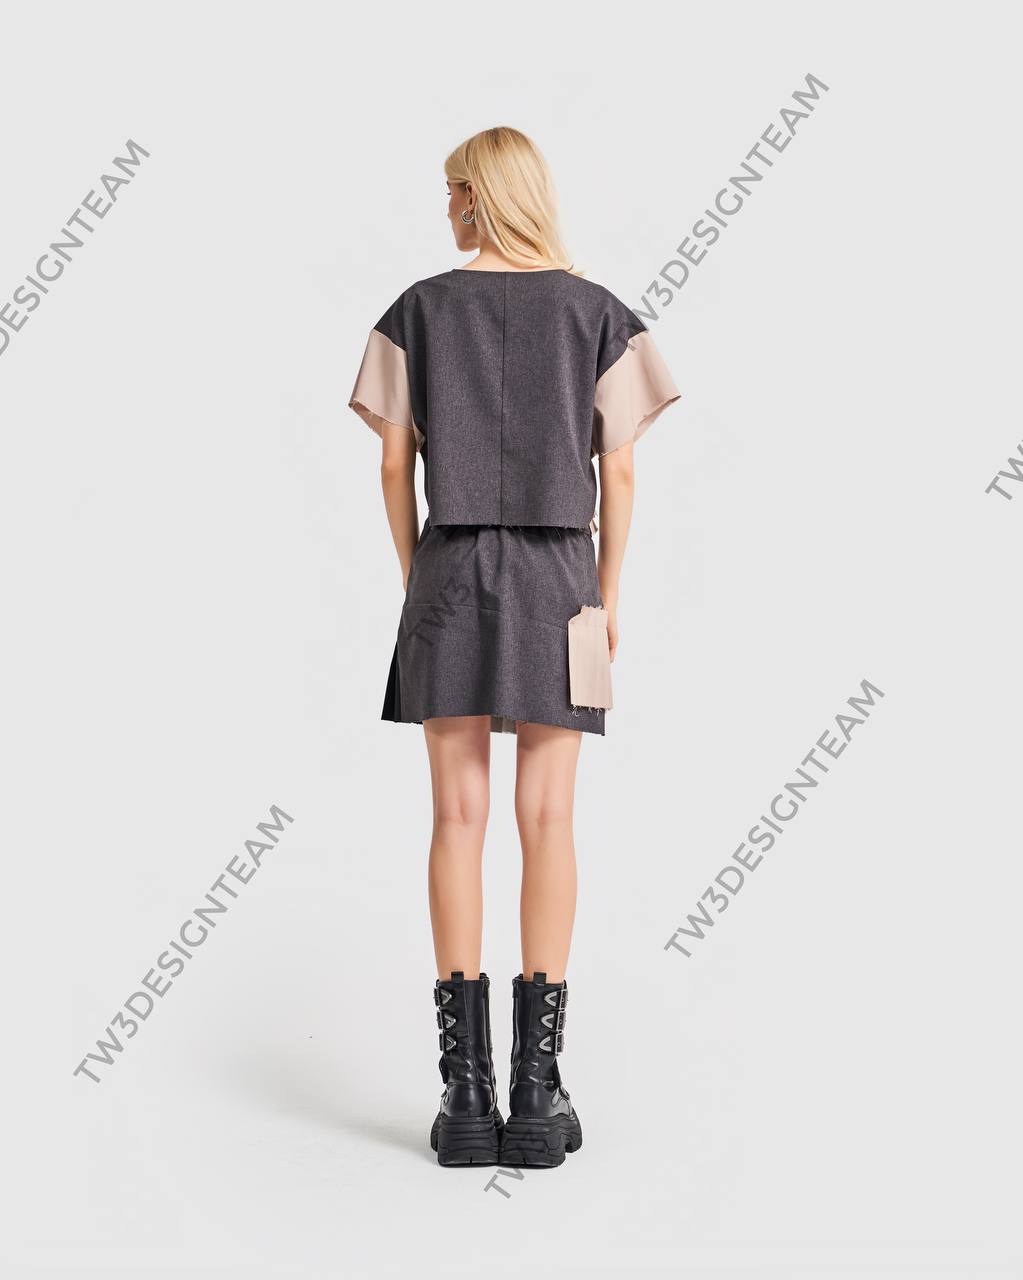 Tw3 skirt limited edition